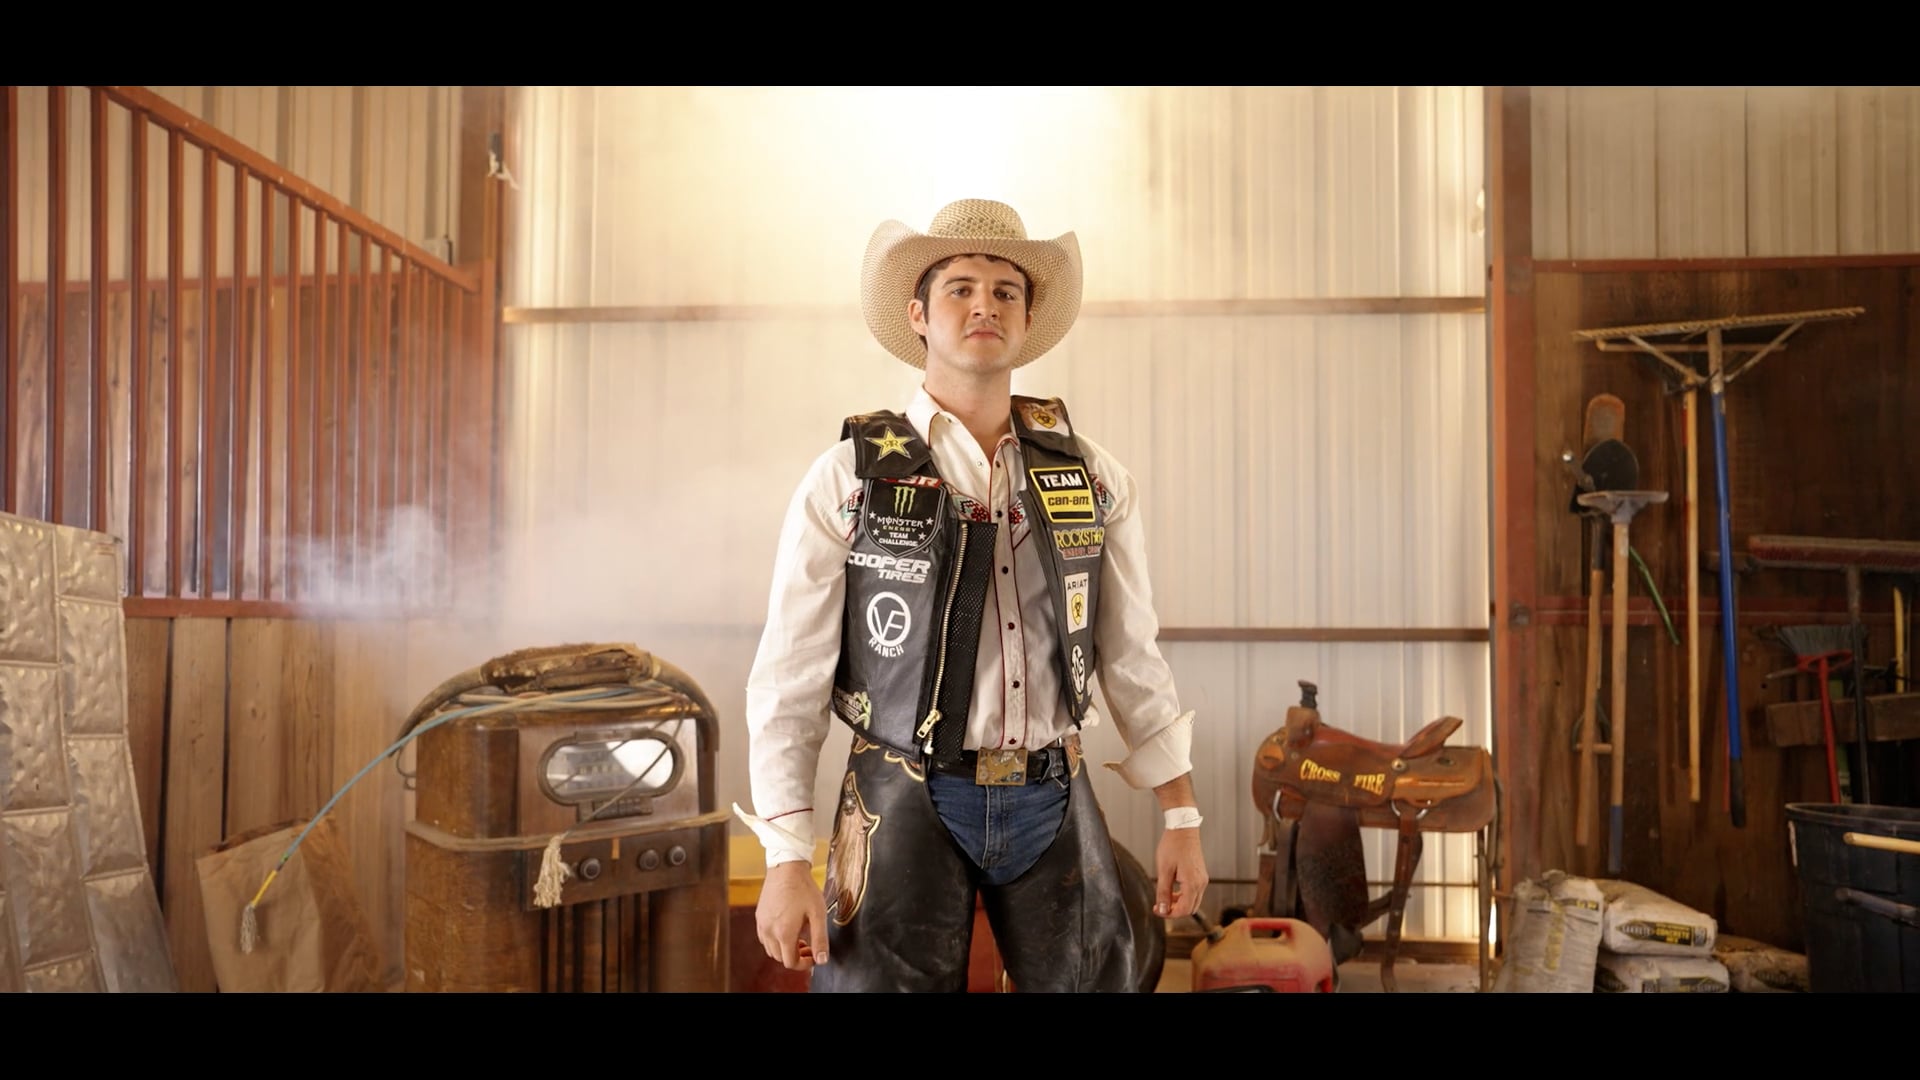 GRANT GILLISPIE - I'M A REAL COWBOY (OFFICIAL MUSIC VIDEO) || 613MEDIA